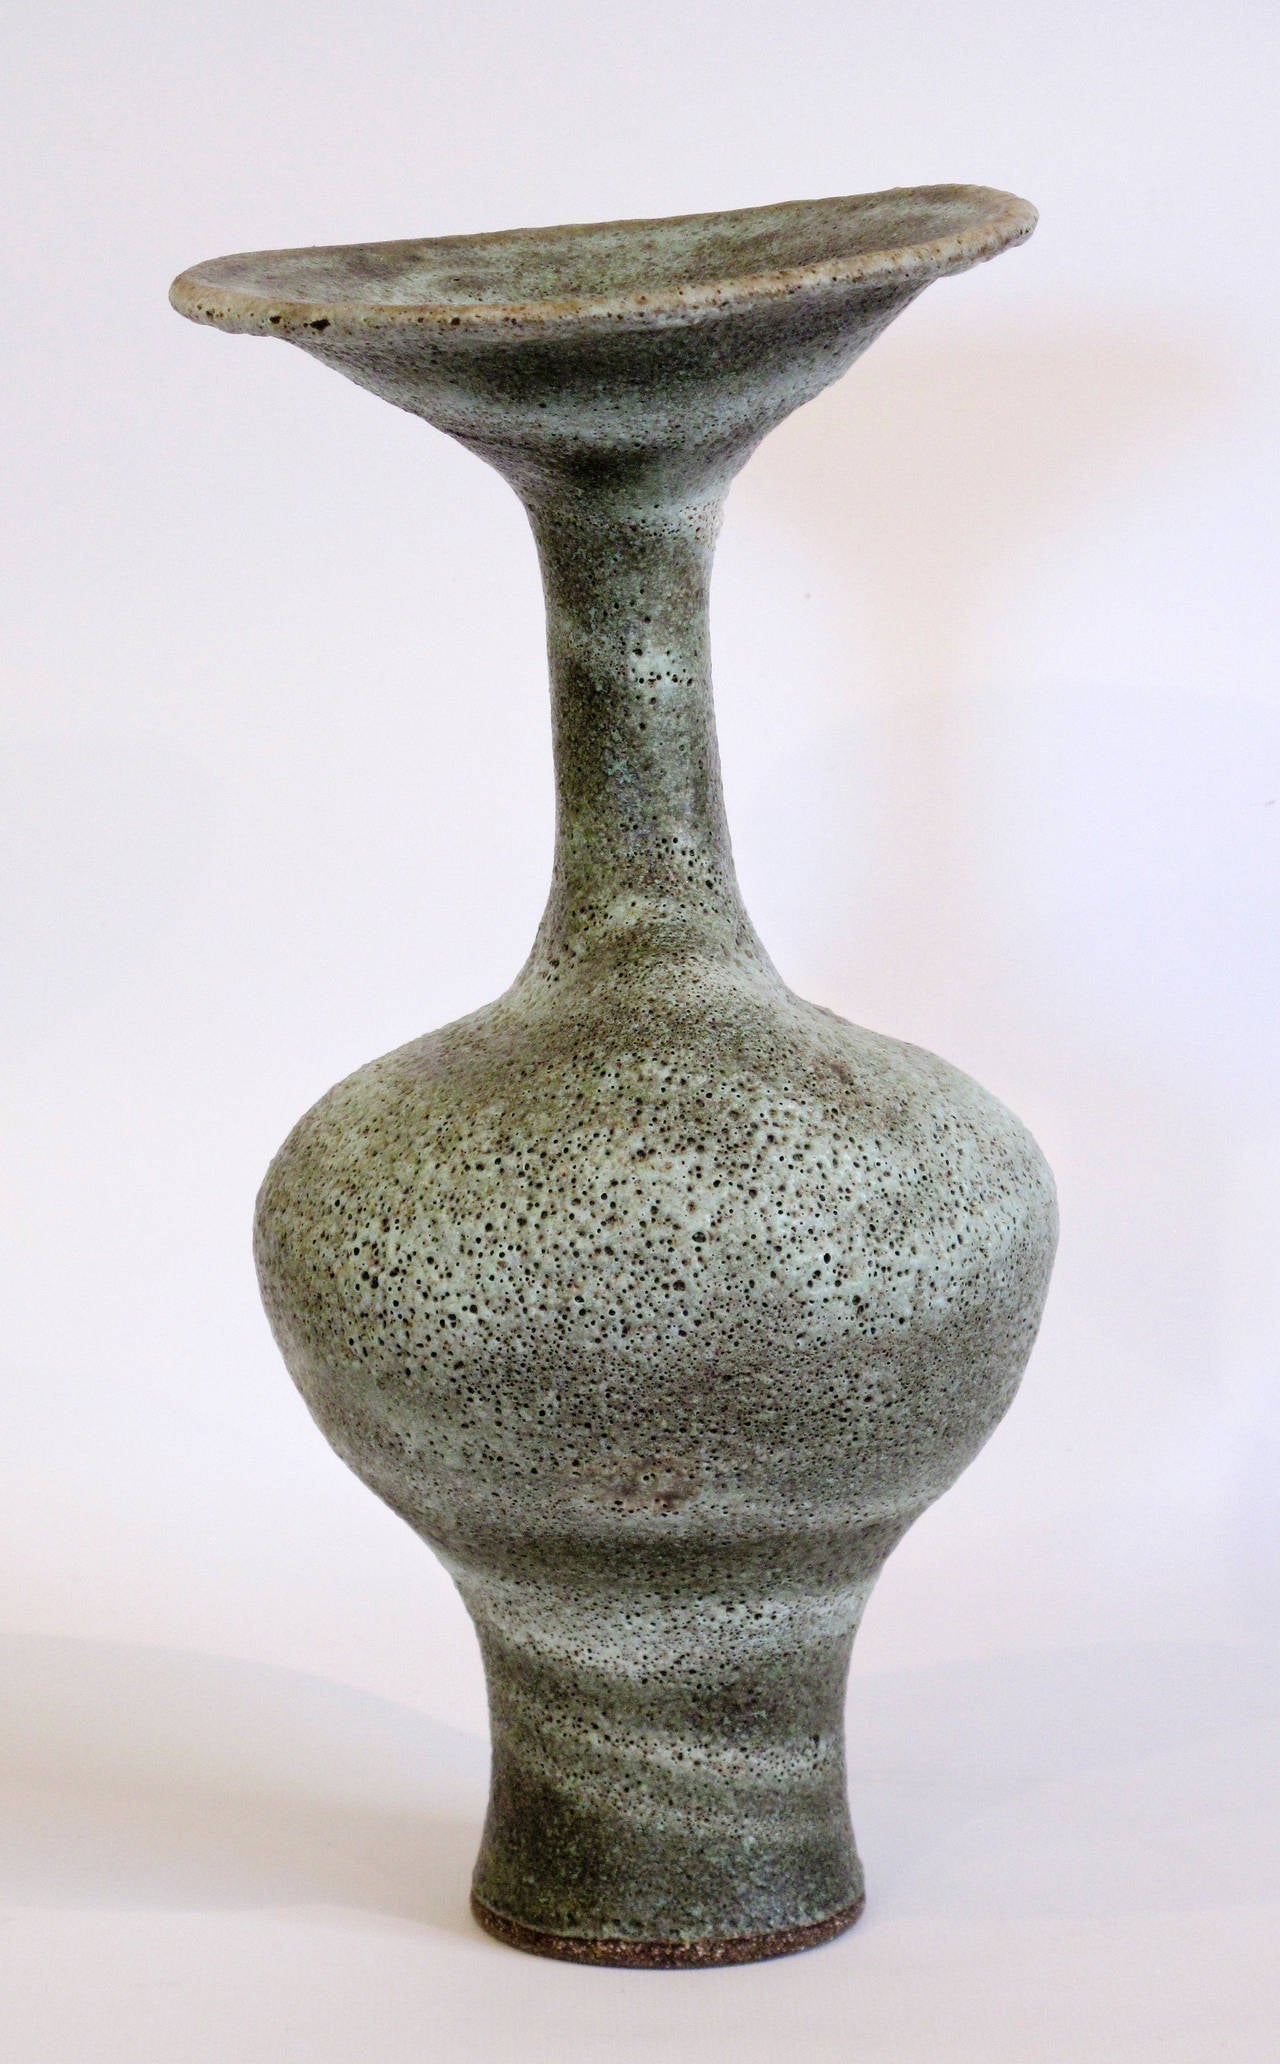 Lucie Rie is one the most important British artists in studio ceramics and craft. Along with Hans Coper, Rie lead studio ceramics into the modern era. To make forms this tall, Lucie assembled her vases in sections: The base and then the neck. This